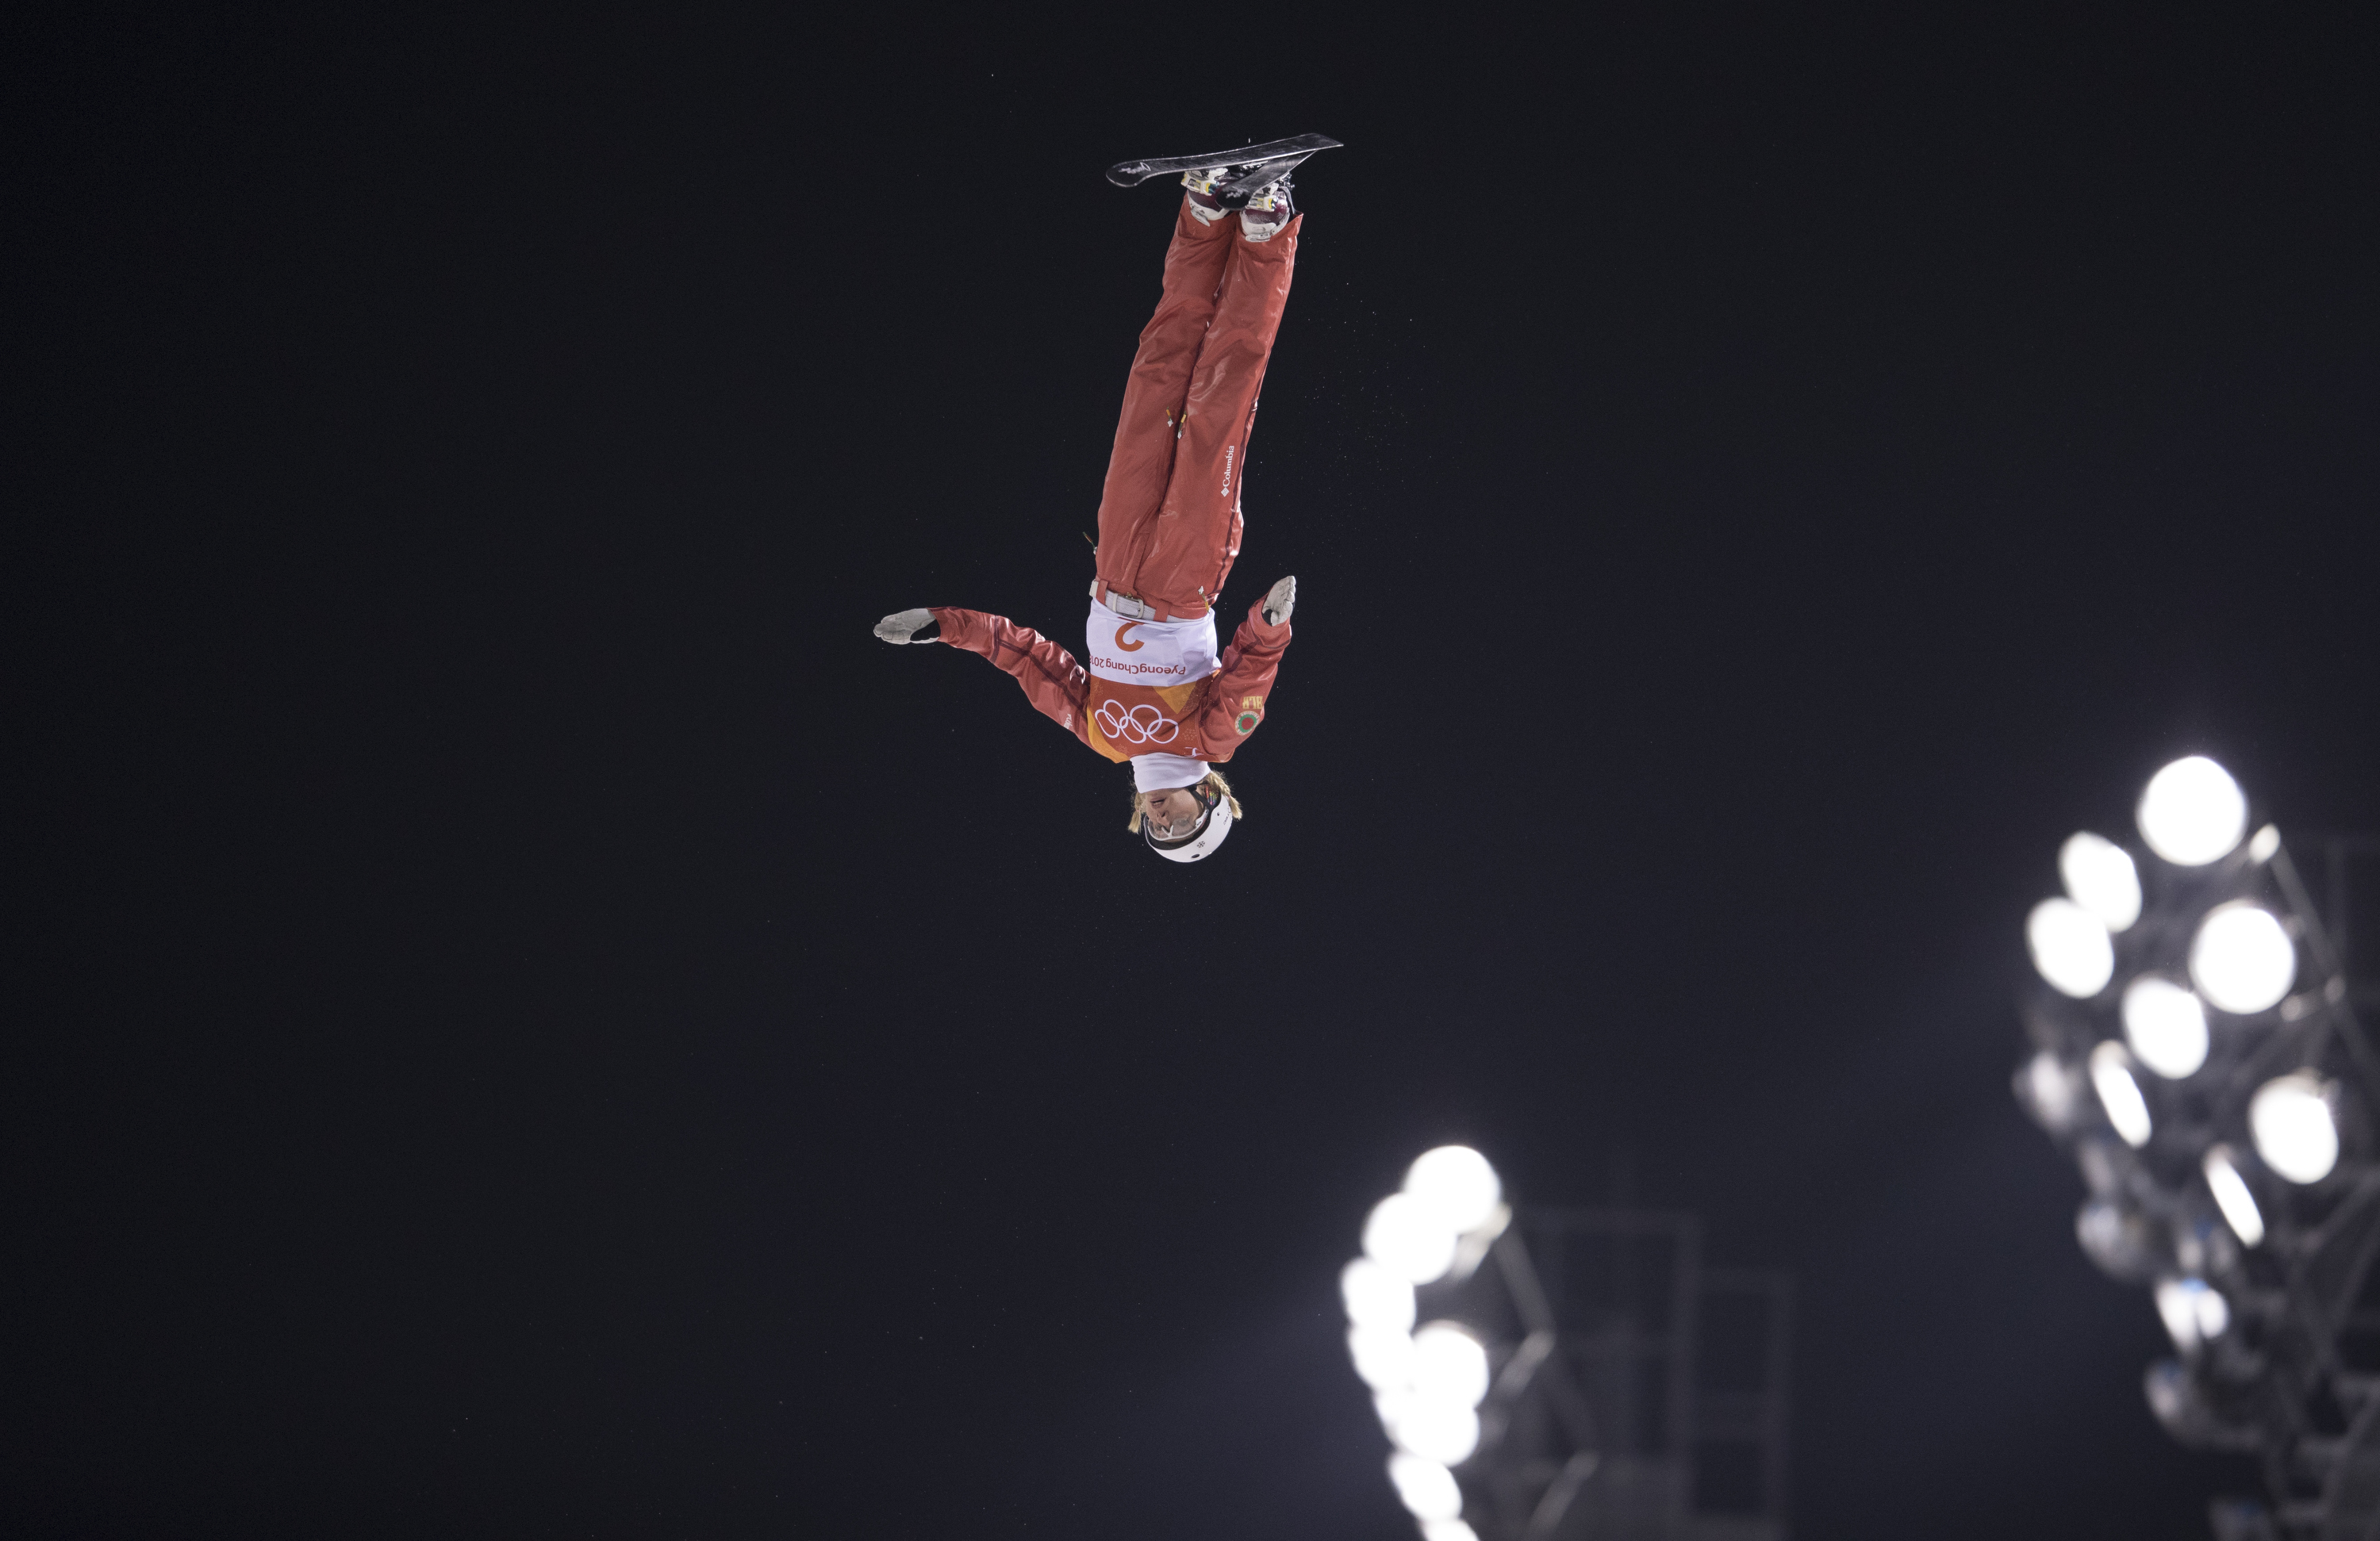 Hanna Huskova of Belarus competes during the Freestyle Skiing Ladies' Aerials Final on day seven of the PyeongChang 2018 Winter Olympic Games at Phoenix Snow Park on February 16, 2018 in Pyeongchang-gun, South Korea. (XIN LI—Getty Images)